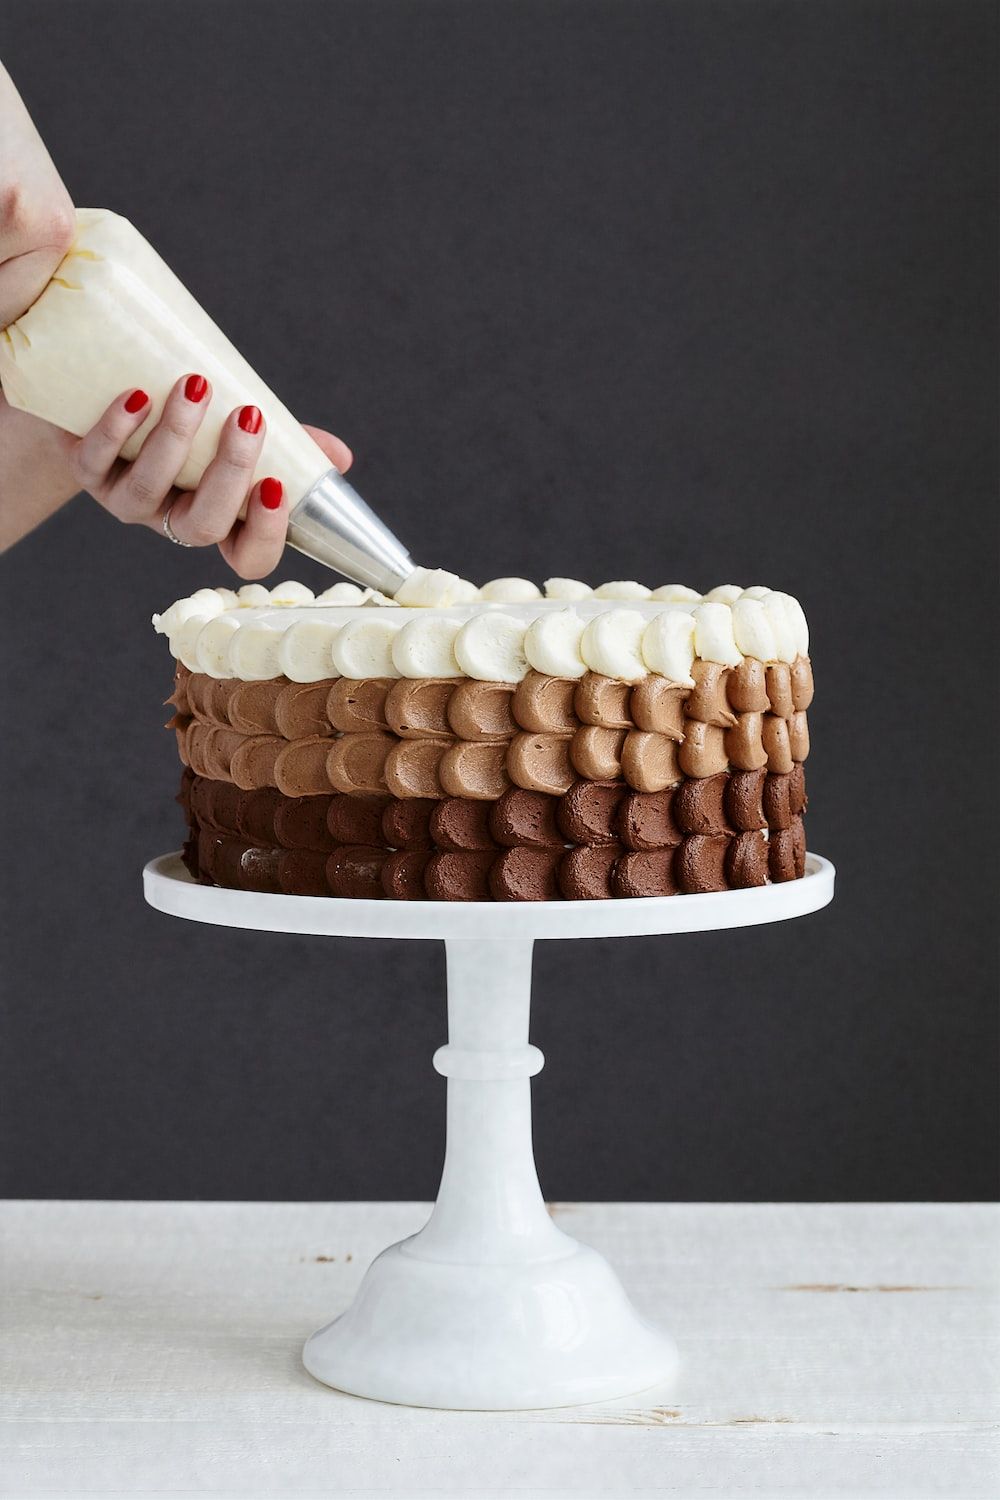 Cake Decorating Picture. Download Free Image